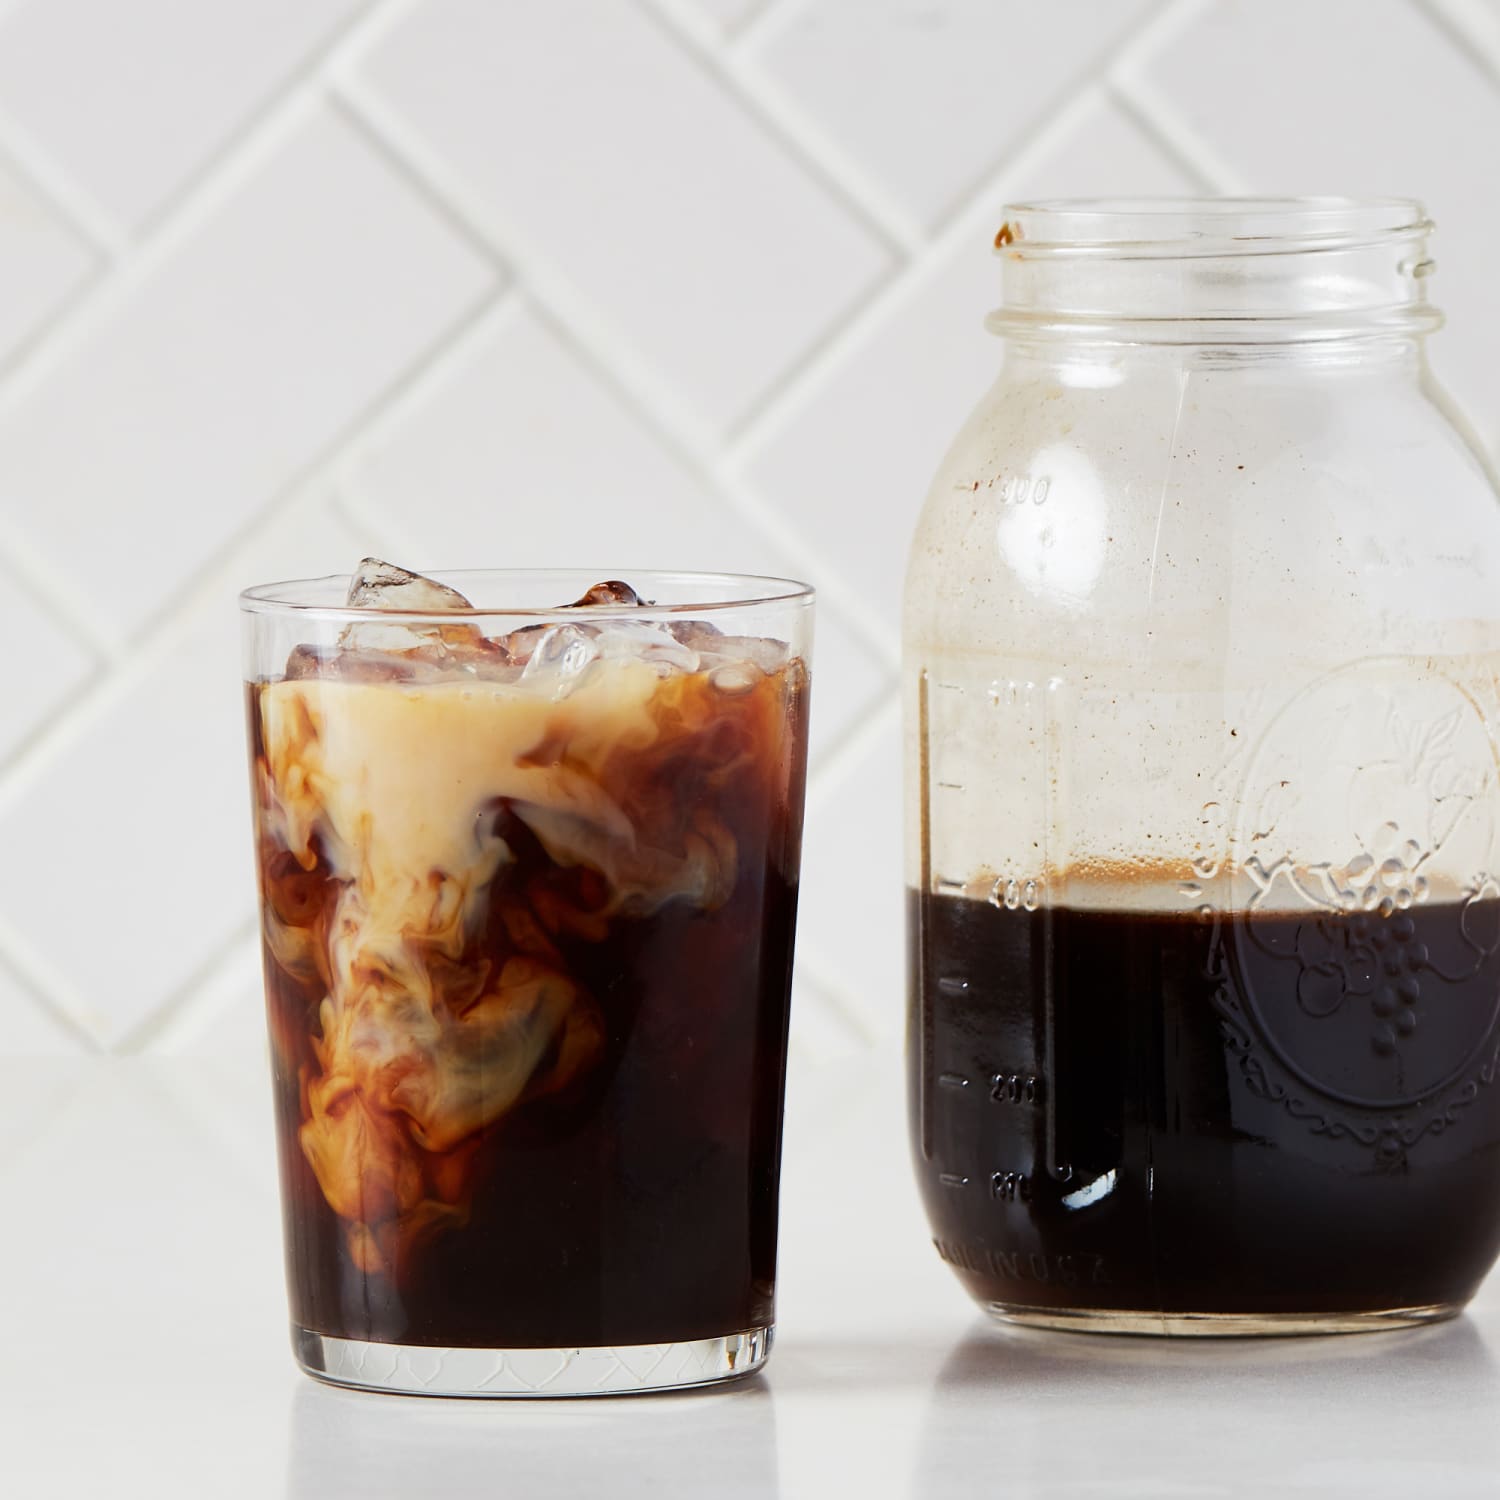 Takeya Cold Brew Iced Coffee Maker - Shop Coffee Makers at H-E-B